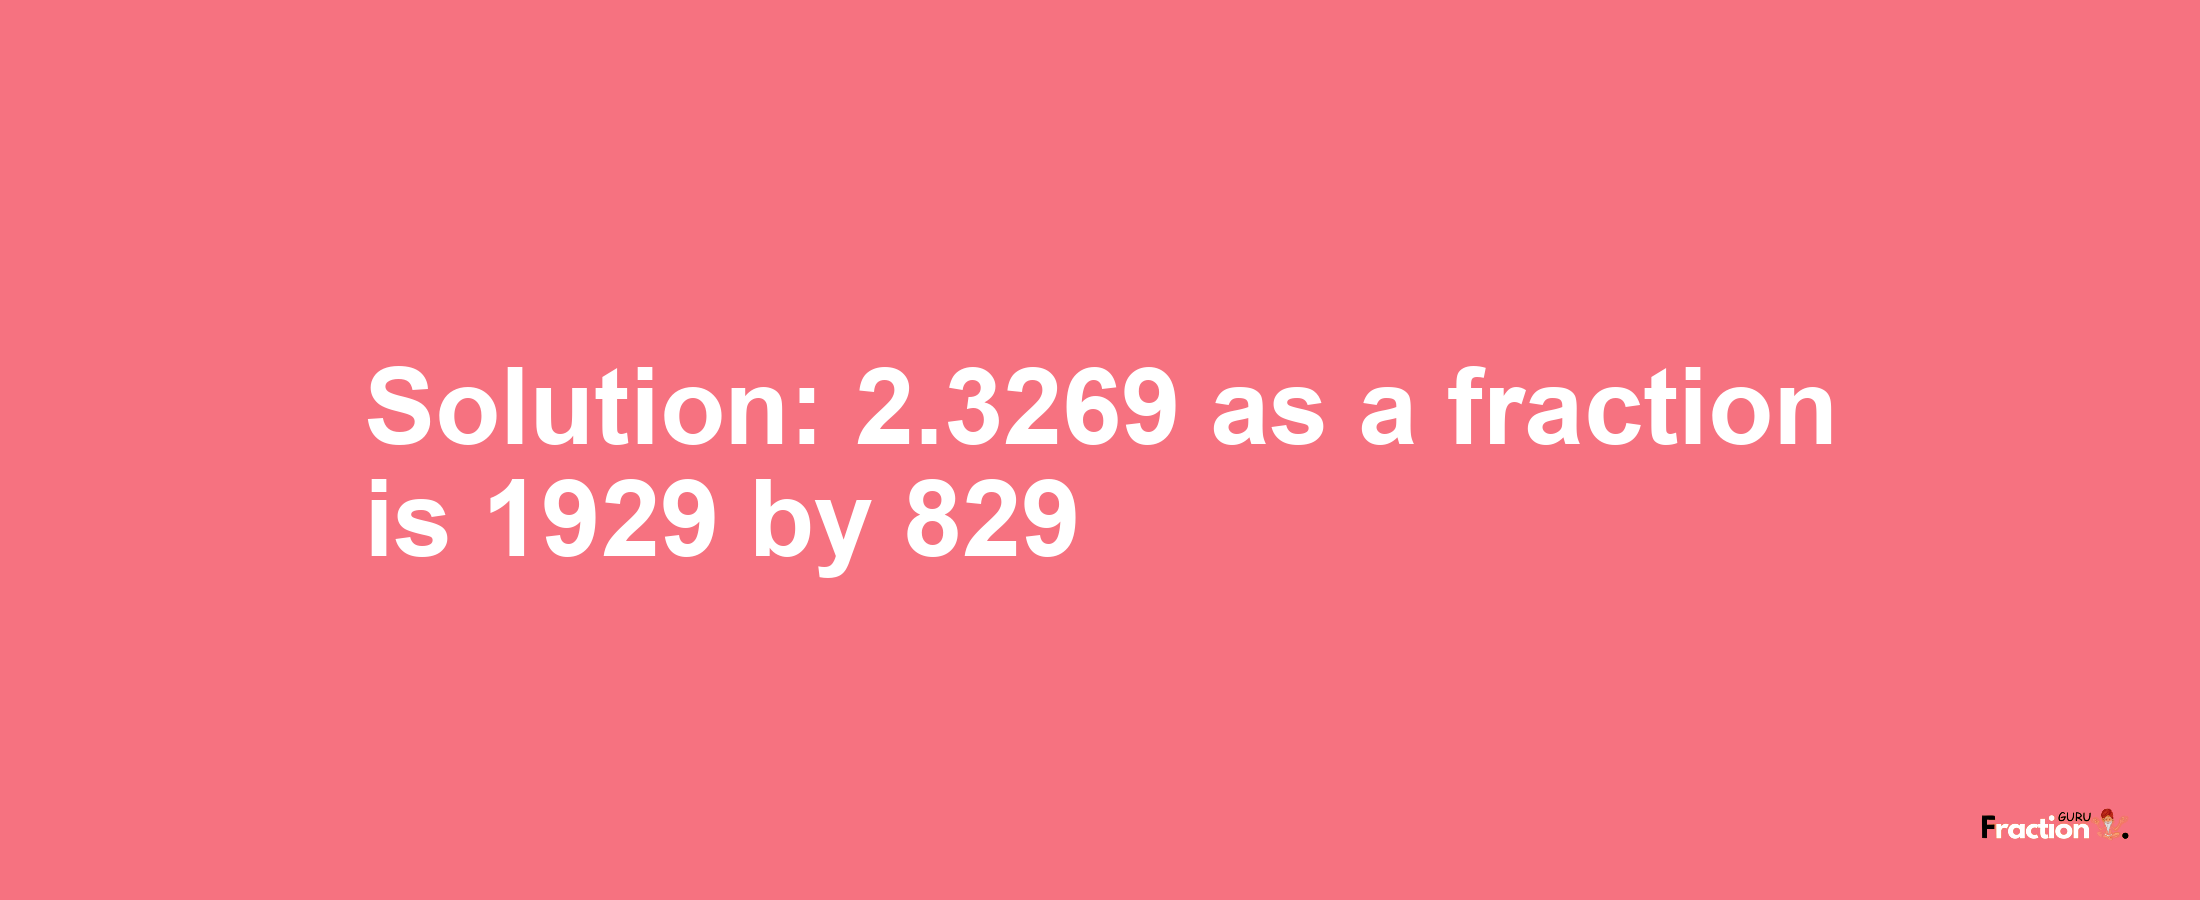 Solution:2.3269 as a fraction is 1929/829